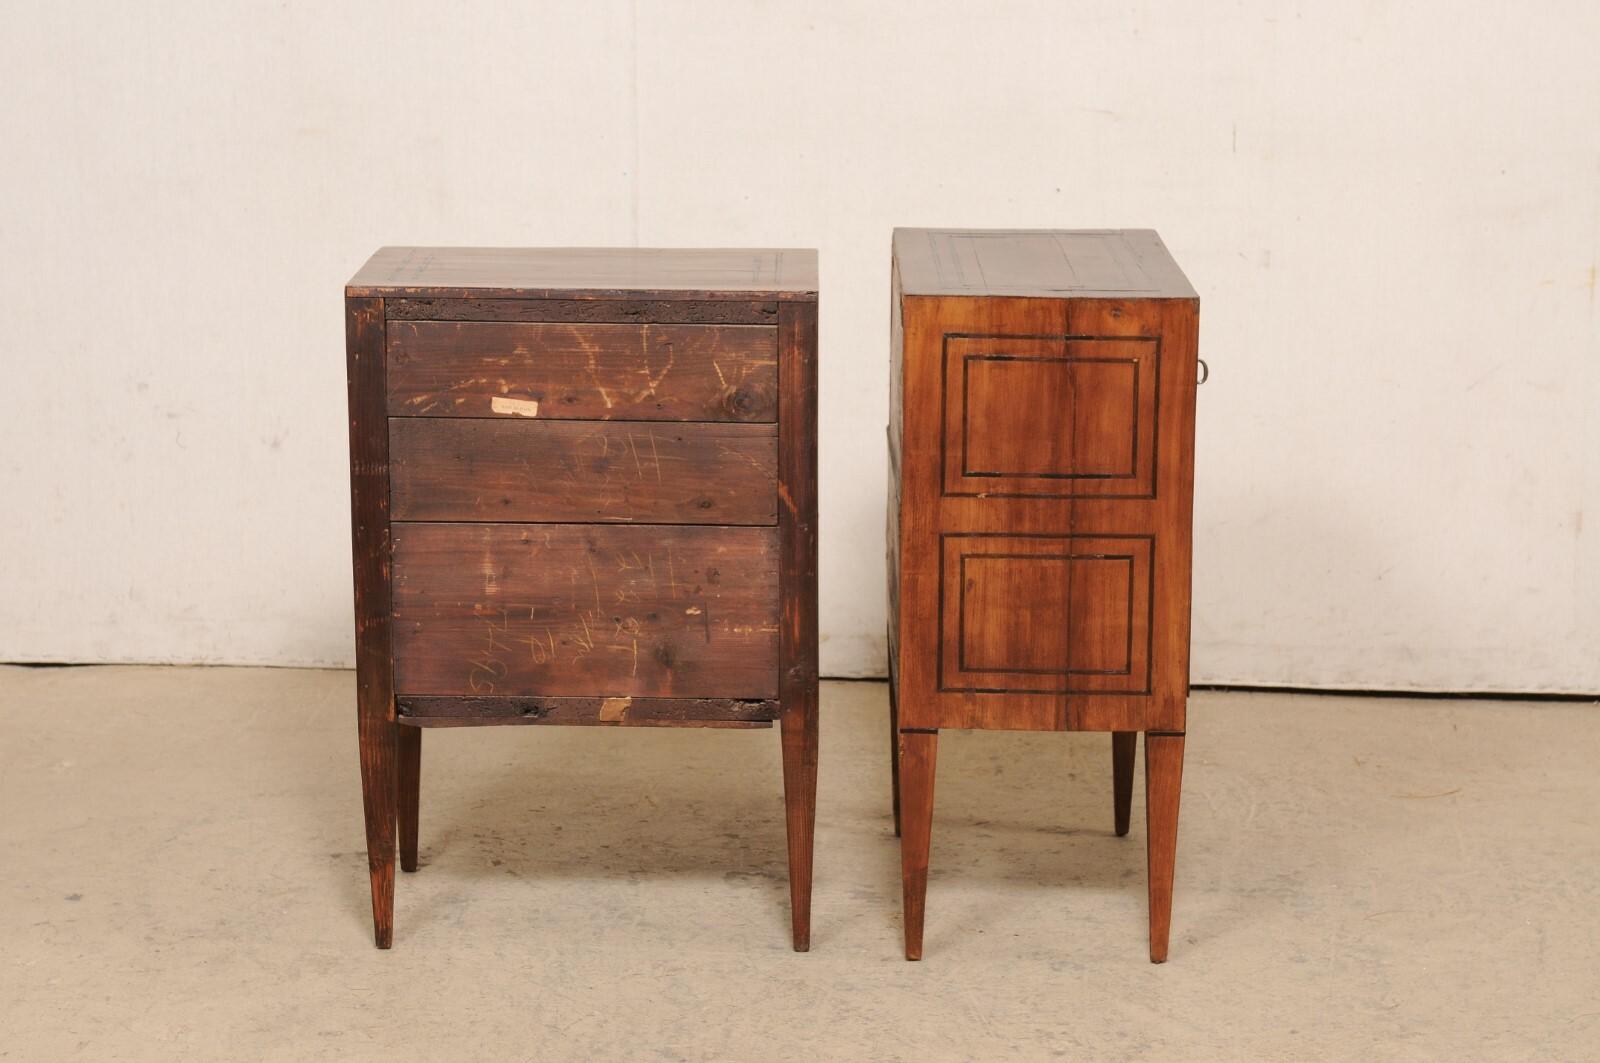 Italian Pair of Two-Drawer Side Chests w/Nice Inlay Banding, Early 19th C. For Sale 5